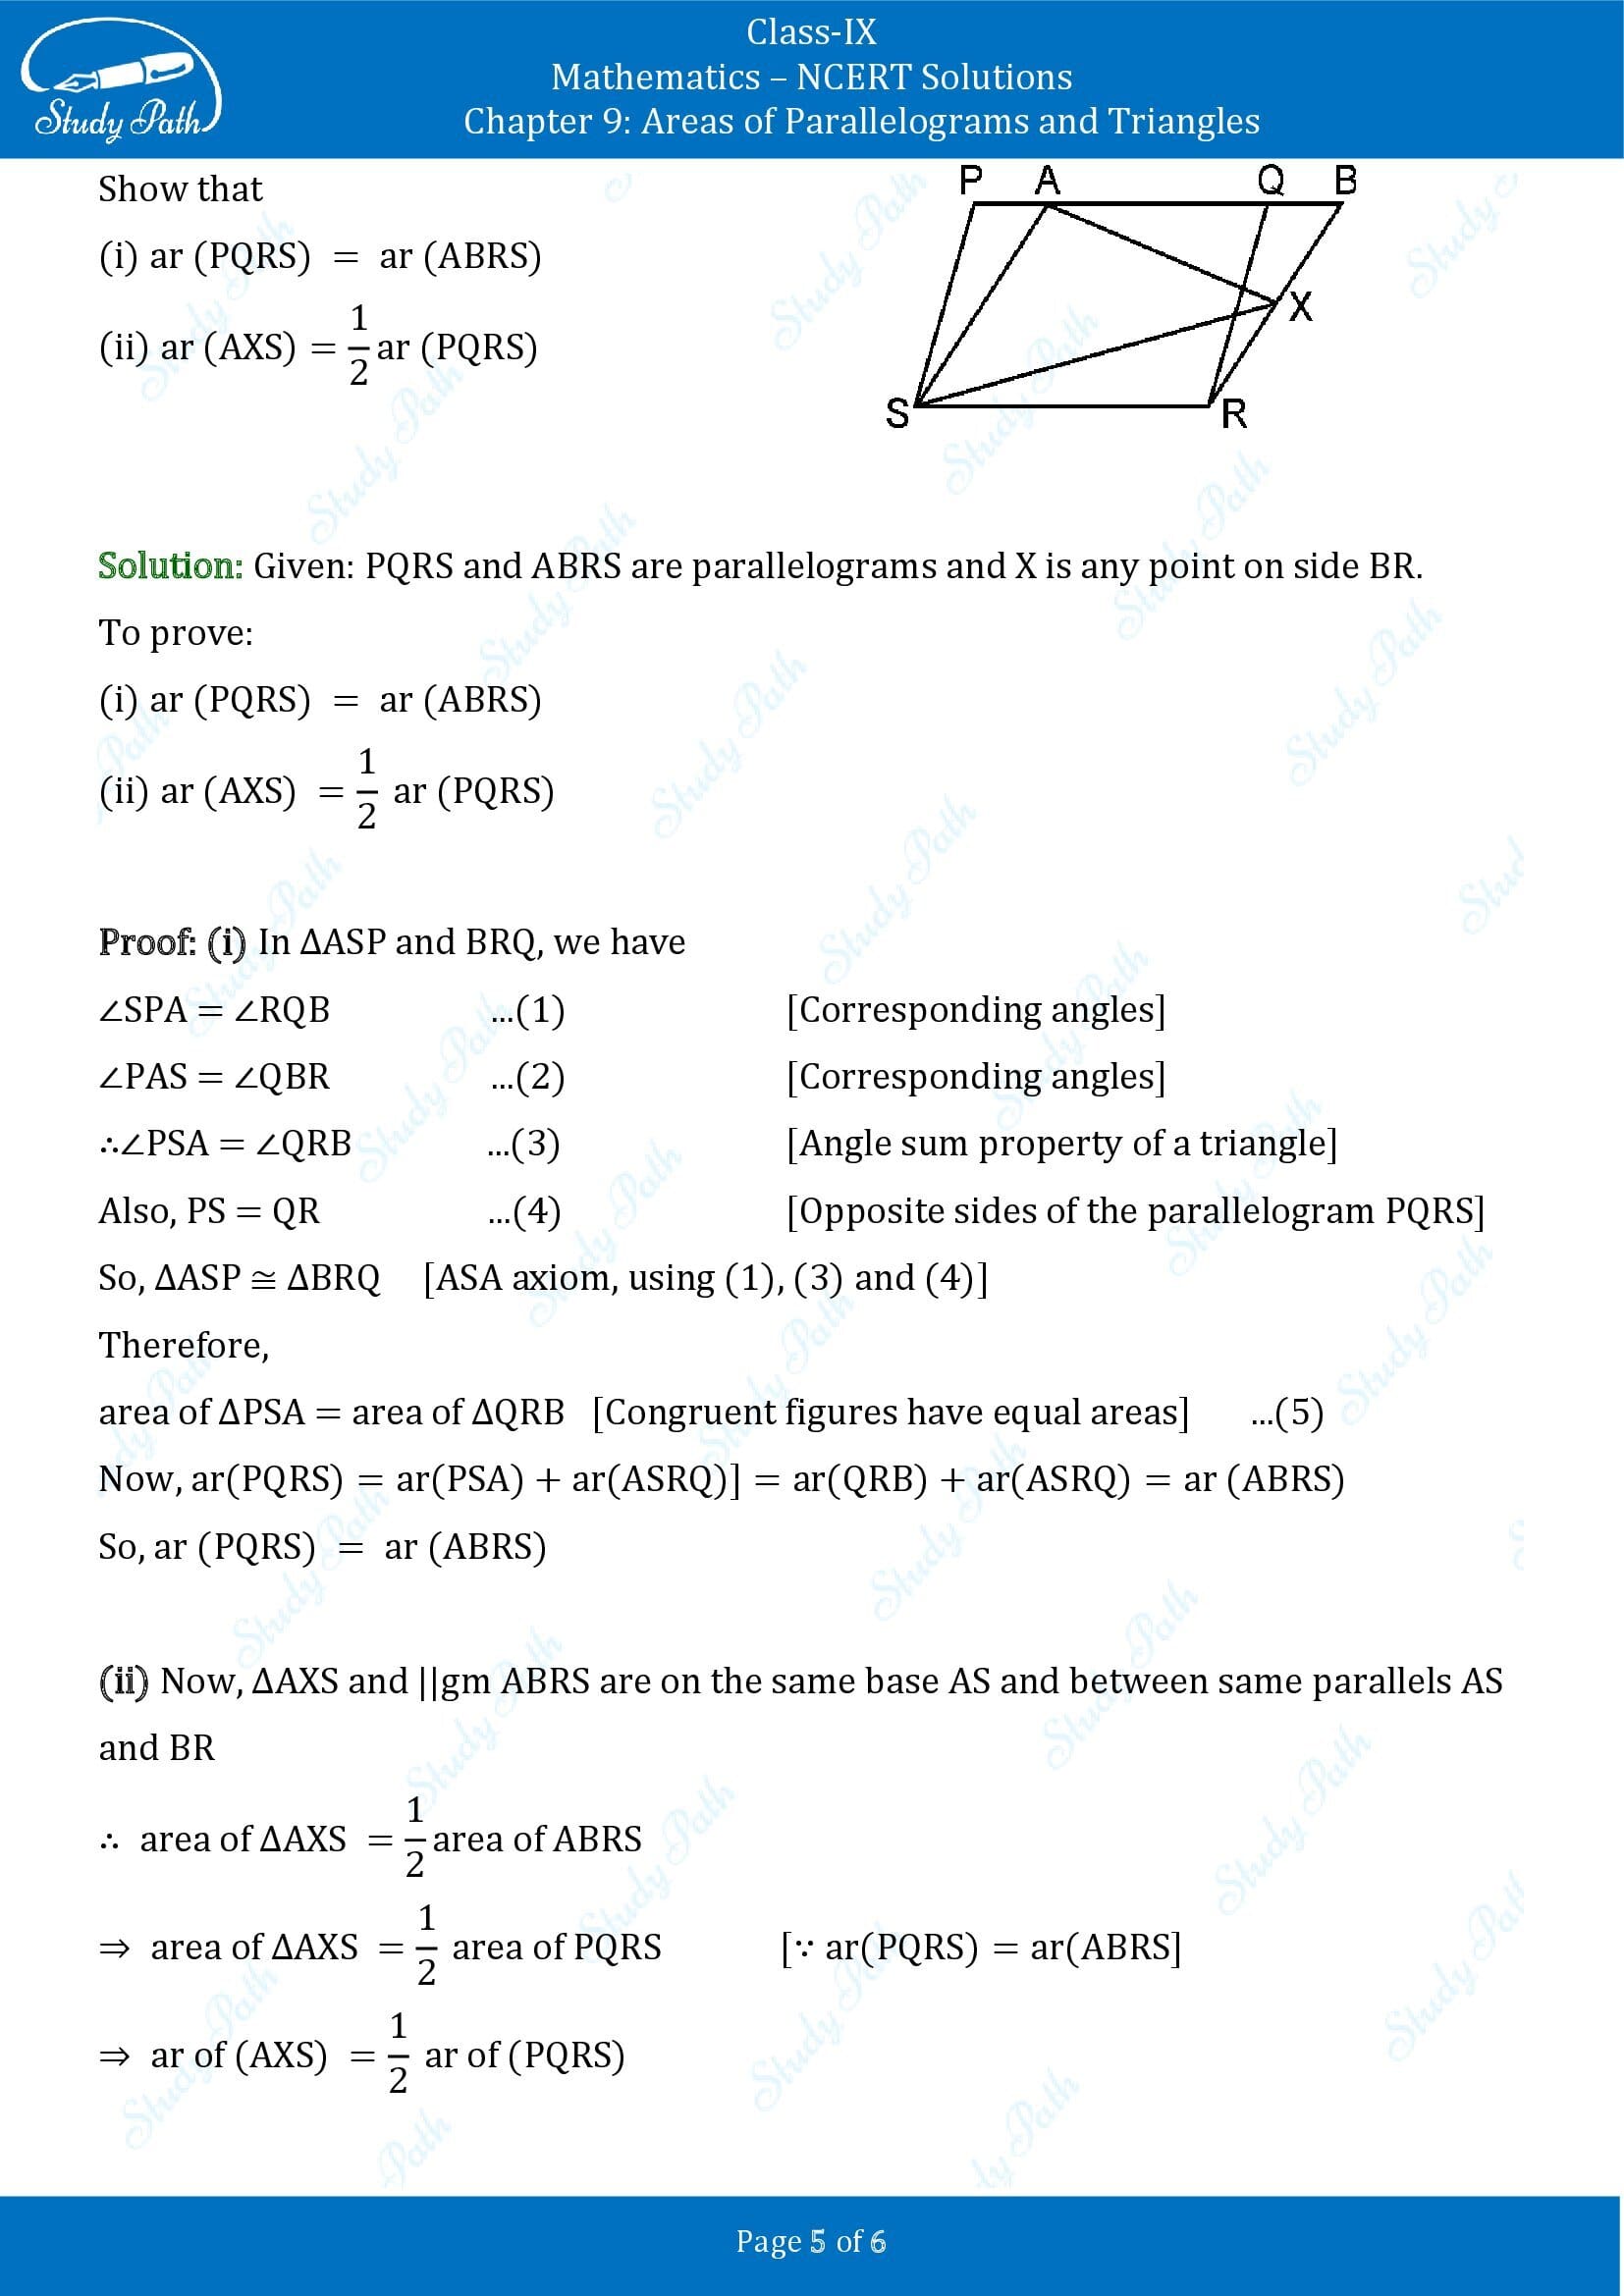 NCERT Solutions for Class 9 Maths Chapter 9 Areas of Parallelograms and Triangles Exercise 9.2 00005